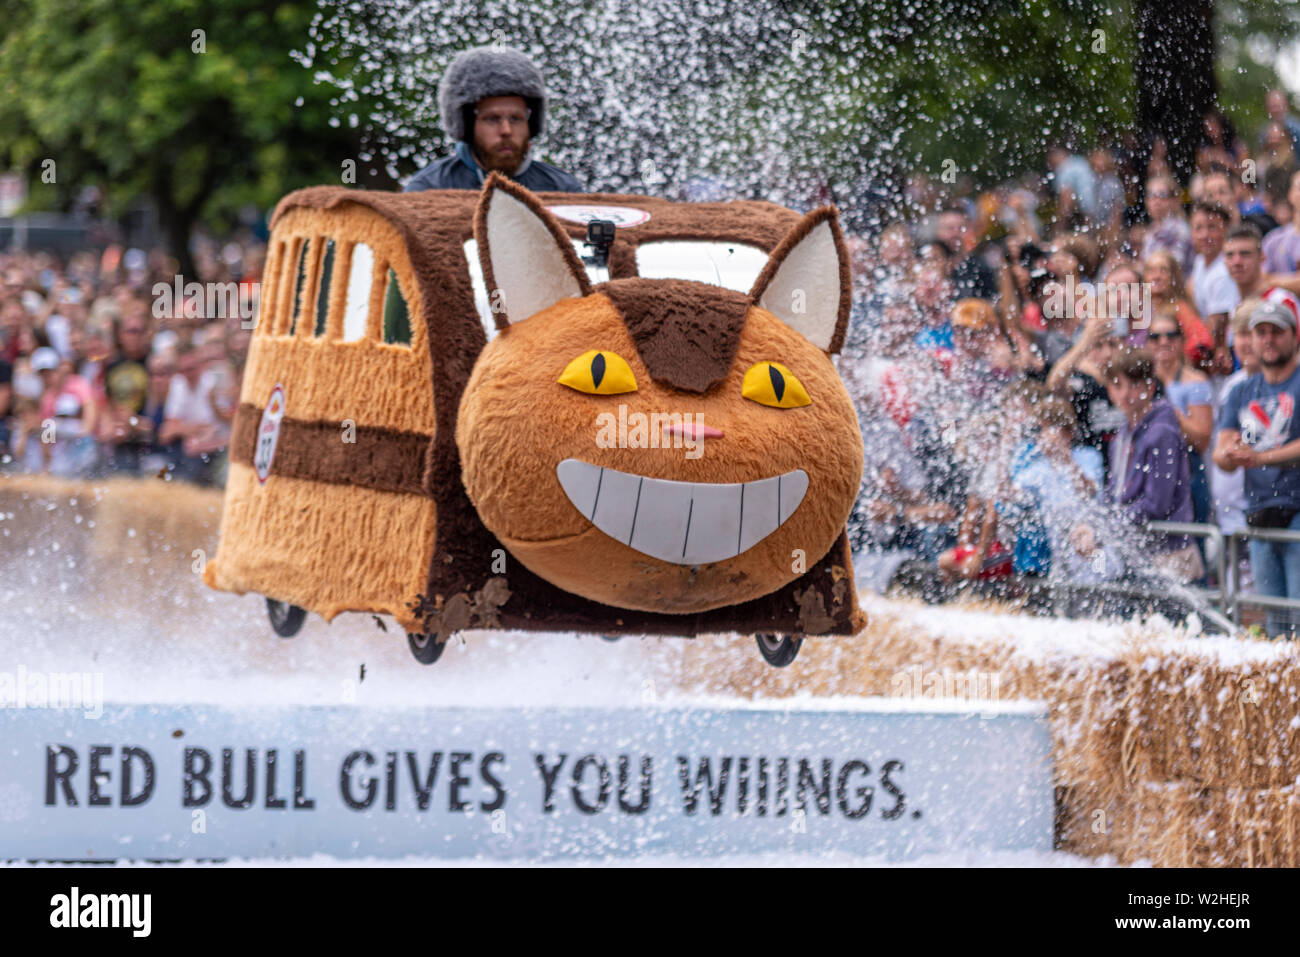 Team Totoro Catbus competing in the Red Bull Soapbox Race 2019 at Alexandra Park, London, UK. Jumping over ramp with people Stock Photo